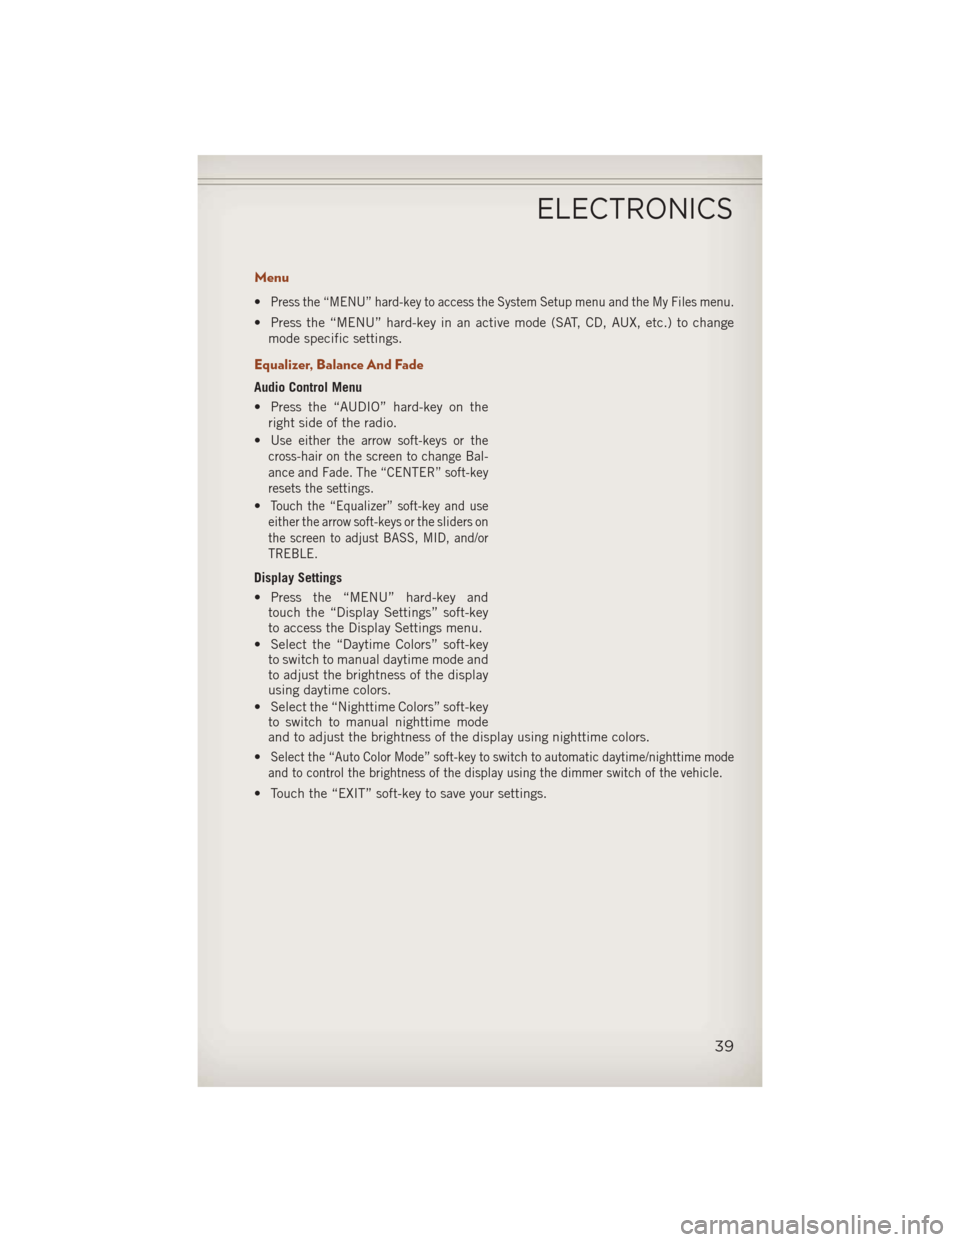 JEEP COMPASS 2013 1.G Service Manual Menu
•Press the “MENU” hard-key to access the System Setup menu and the My Files menu.
• Press the “MENU” hard-key in an active mode (SAT, CD, AUX, etc.) to changemode specific settings.
E